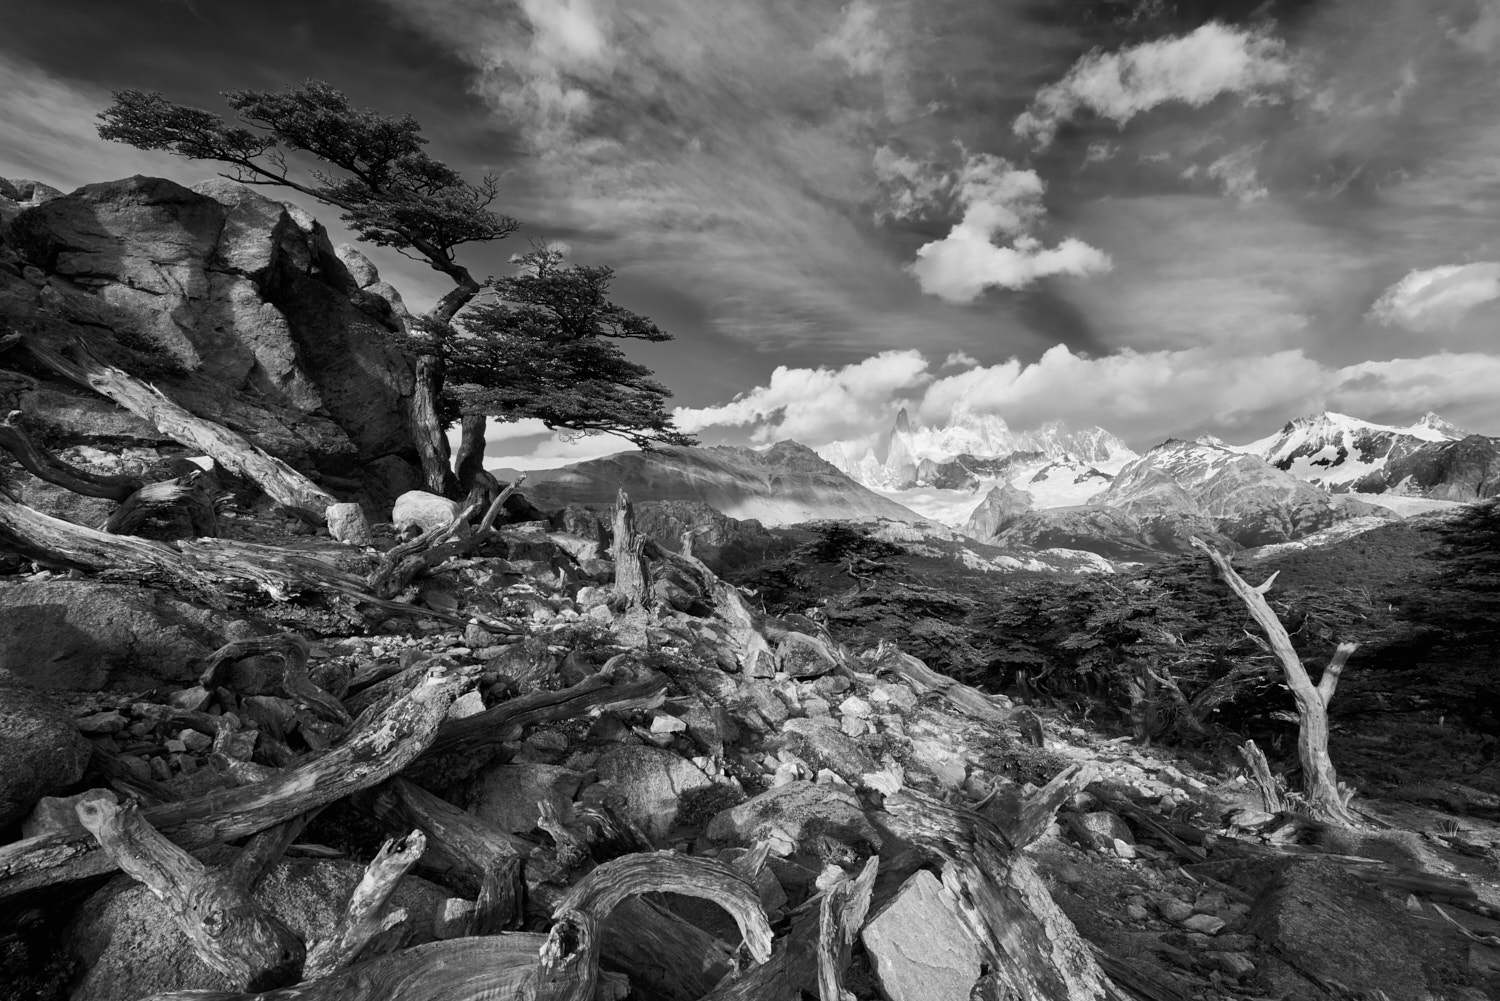 Patagonia, Argentina: Artistic wide angle black and white landscape with dead trees in the foreground and Mount Fitzroy in the far distance.